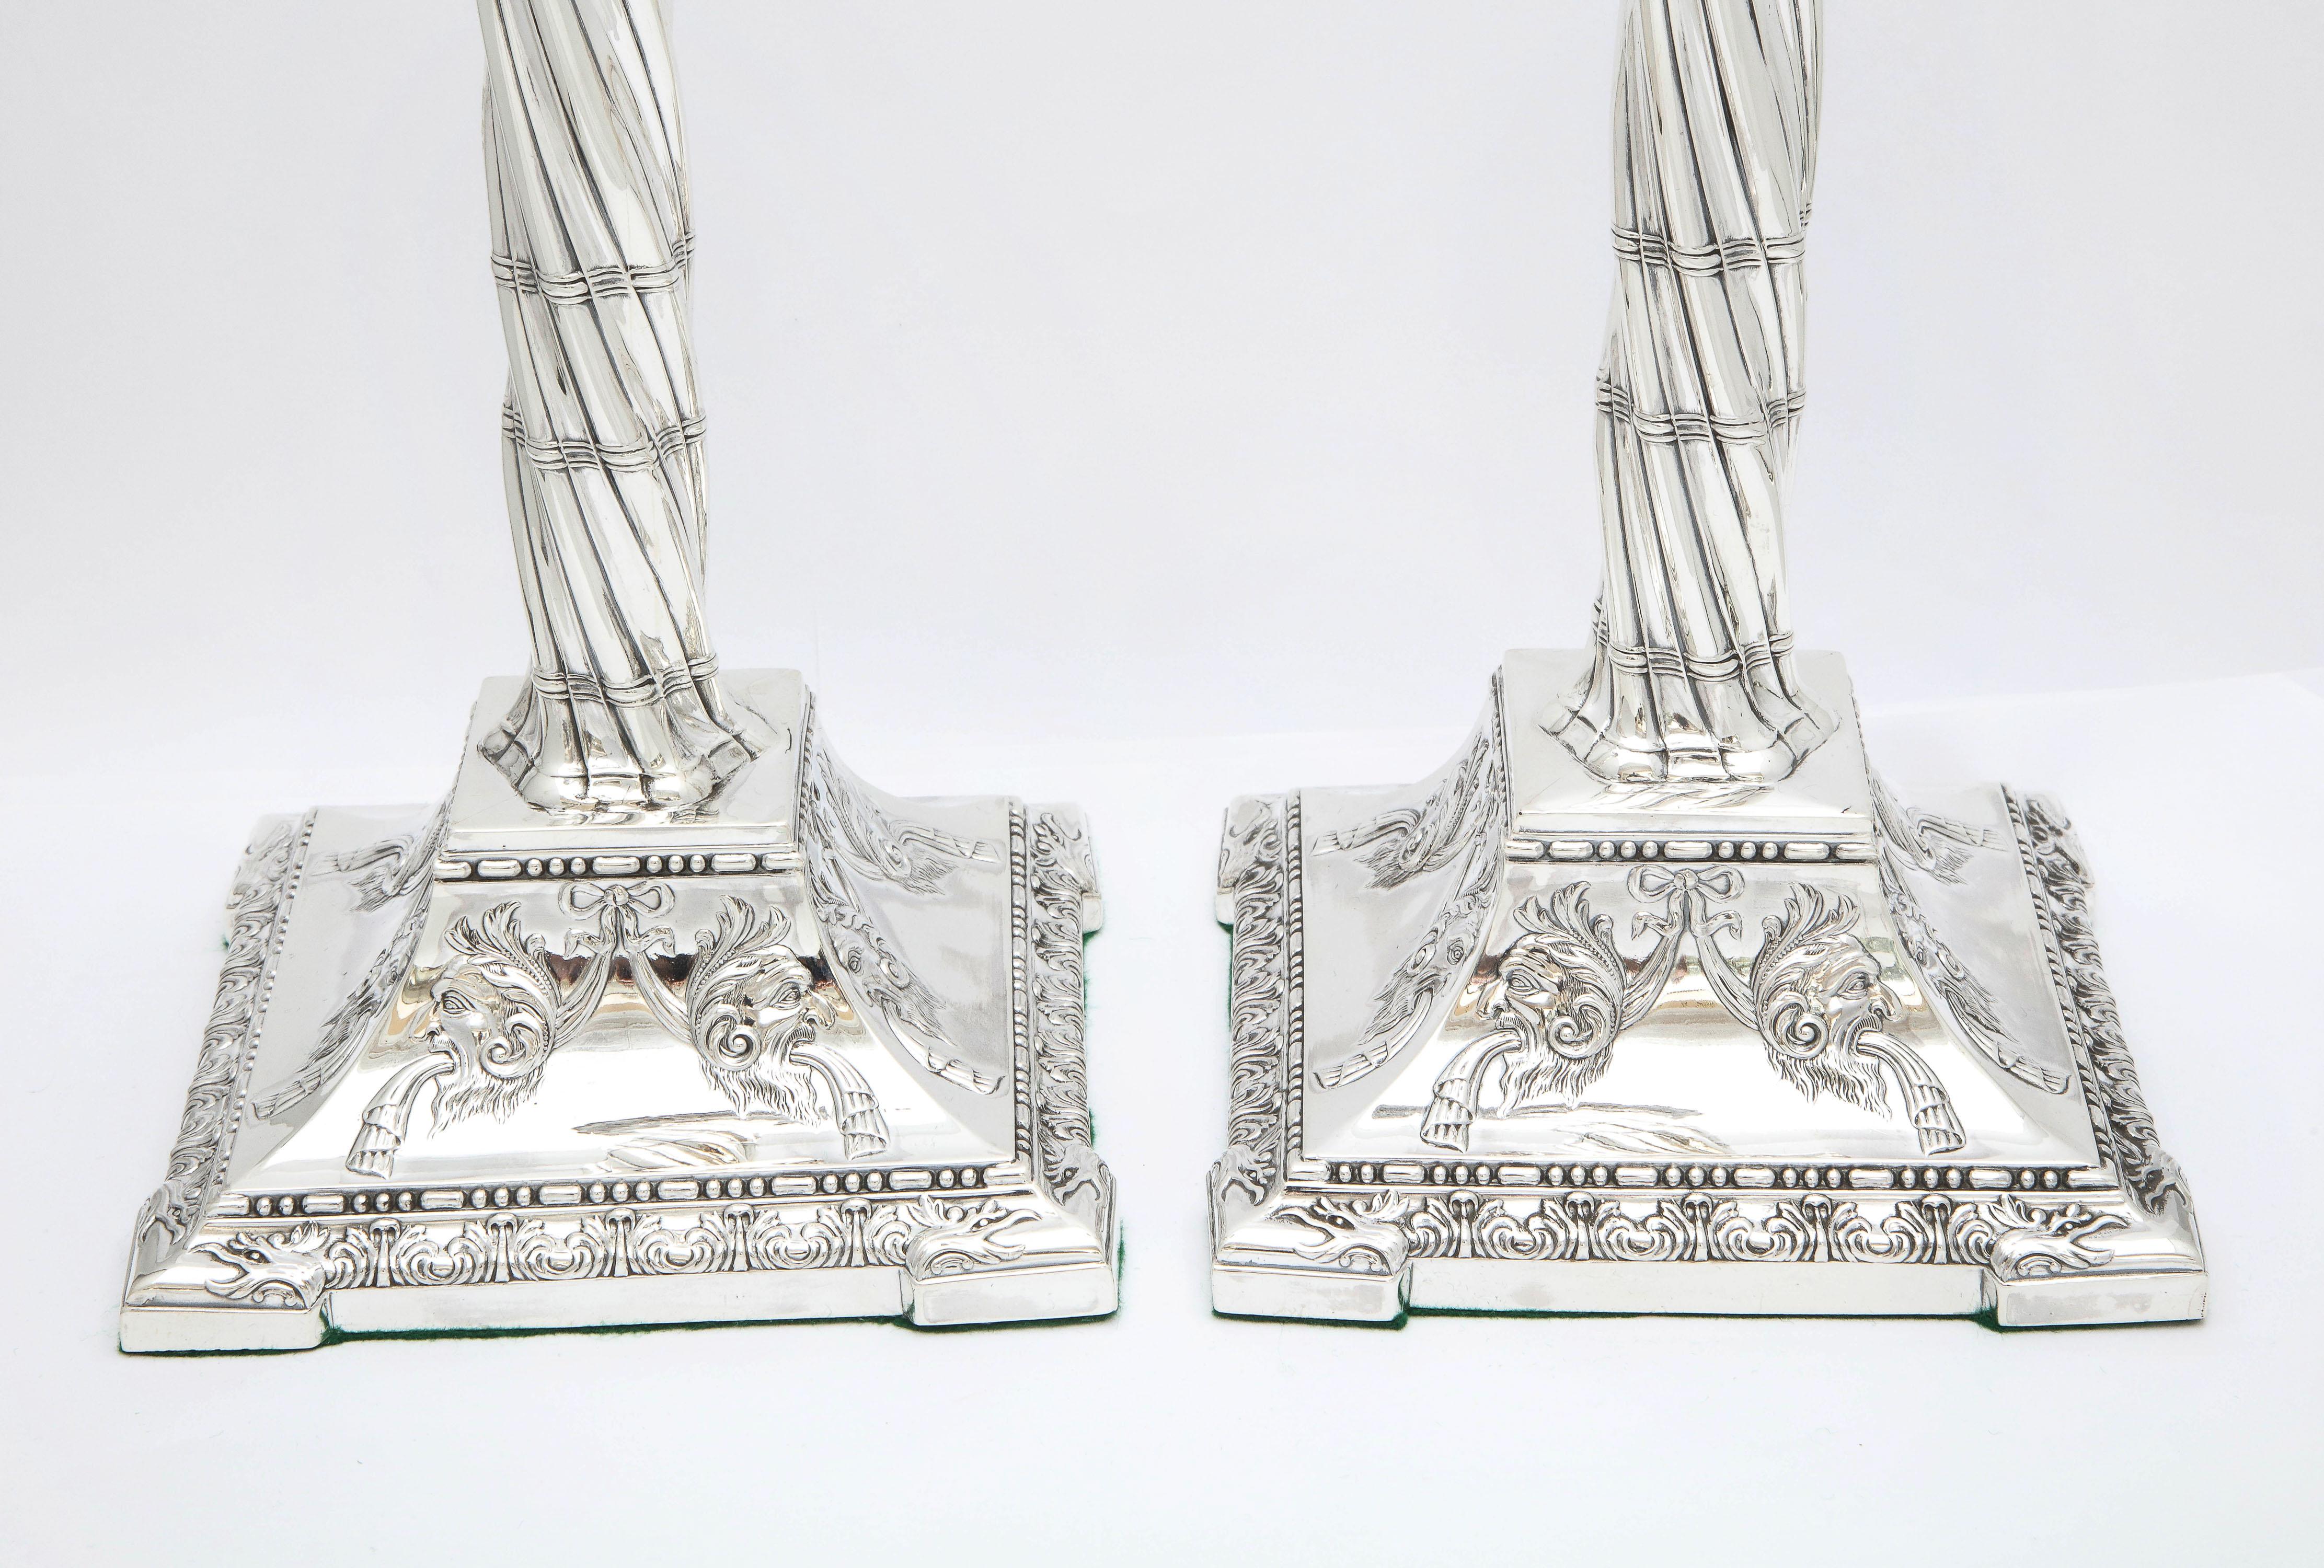 Large Pair of Neoclassical Sterling Silver Column-Form Candlesticks For Sale 7